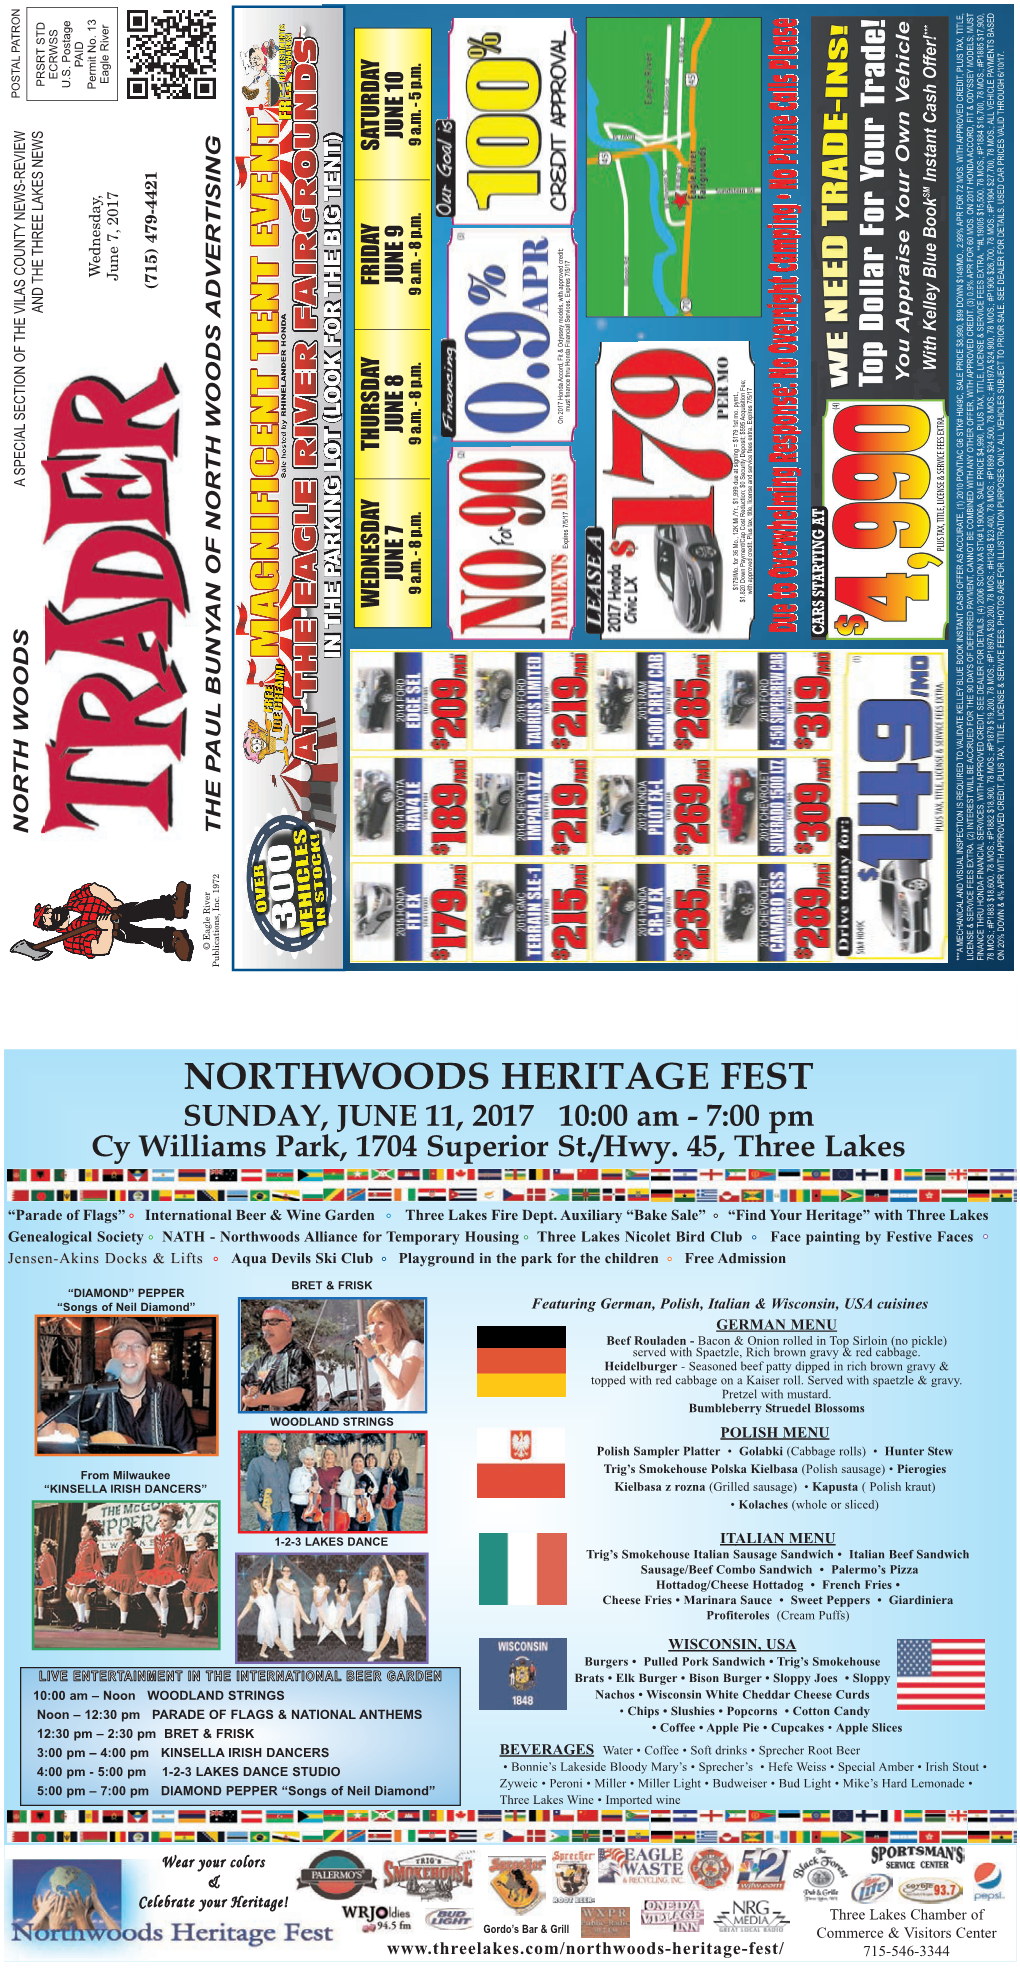 NORTHWOODS HERITAGE FEST SUNDAY, JUNE 11, 2017 10:00 Am - 7:00 Pm Cy Williams Park, 1704 Superior St./Hwy